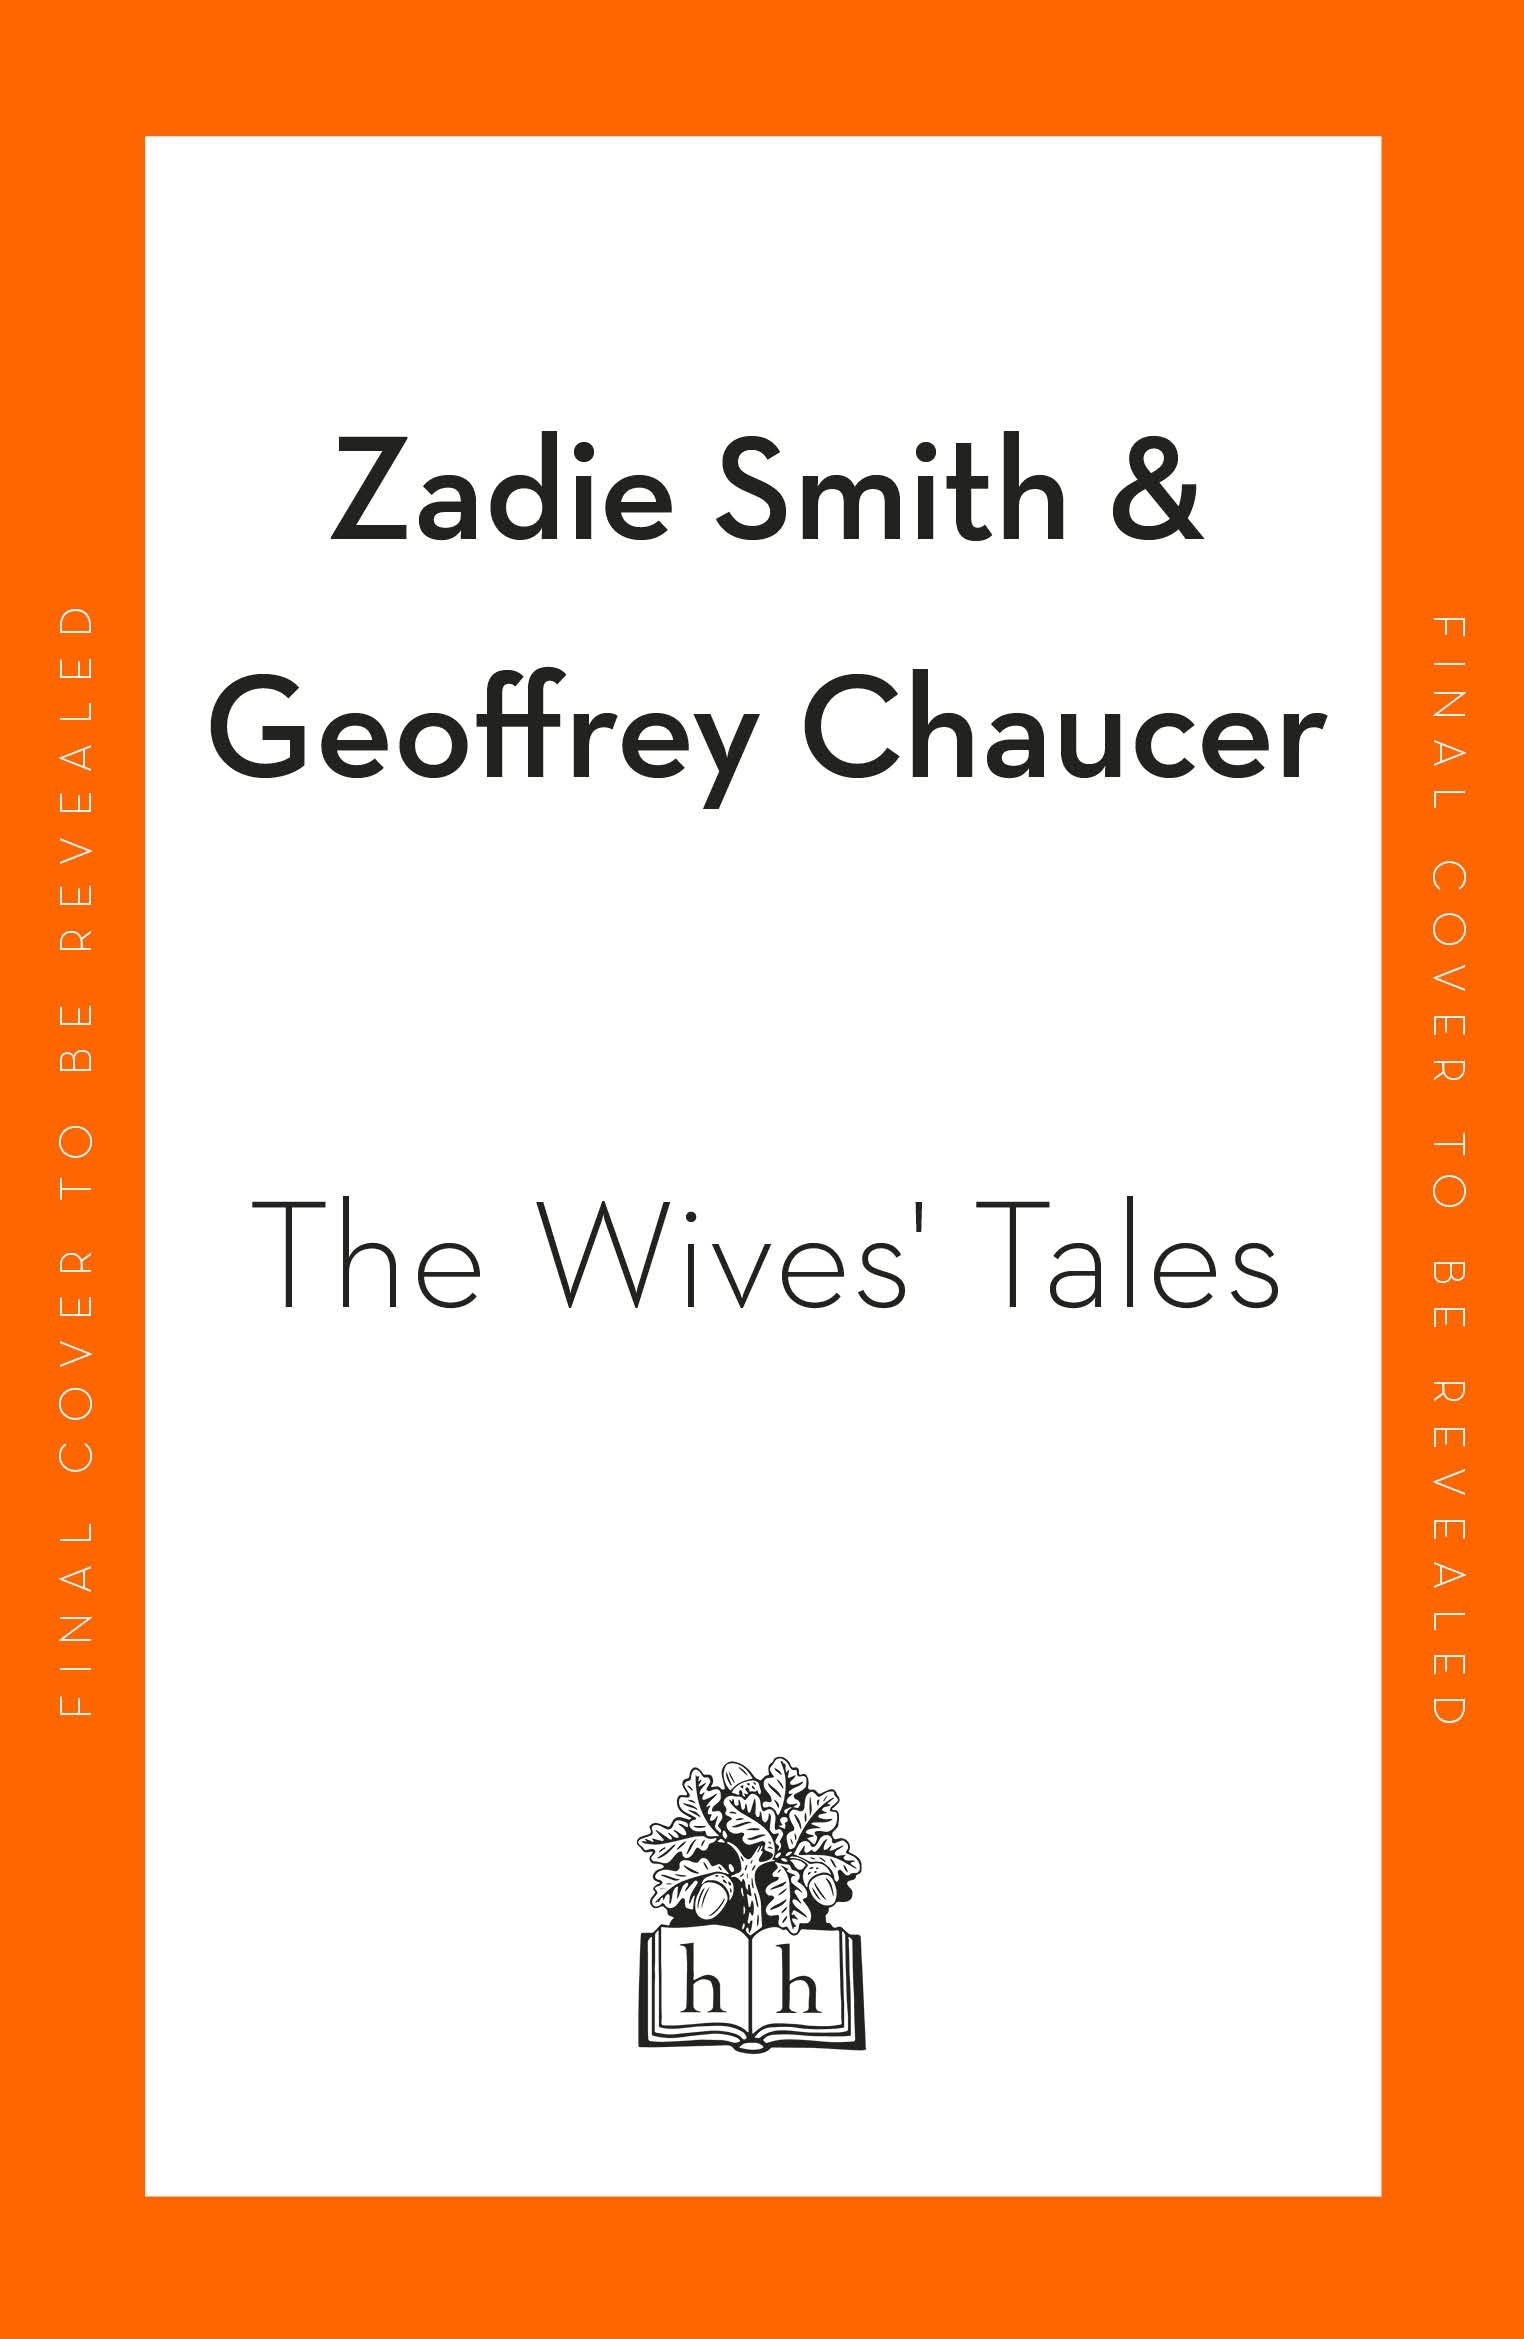 Book “The Wives' Tales” by Zadie Smith, Geoffrey Chaucer — September 29, 2022